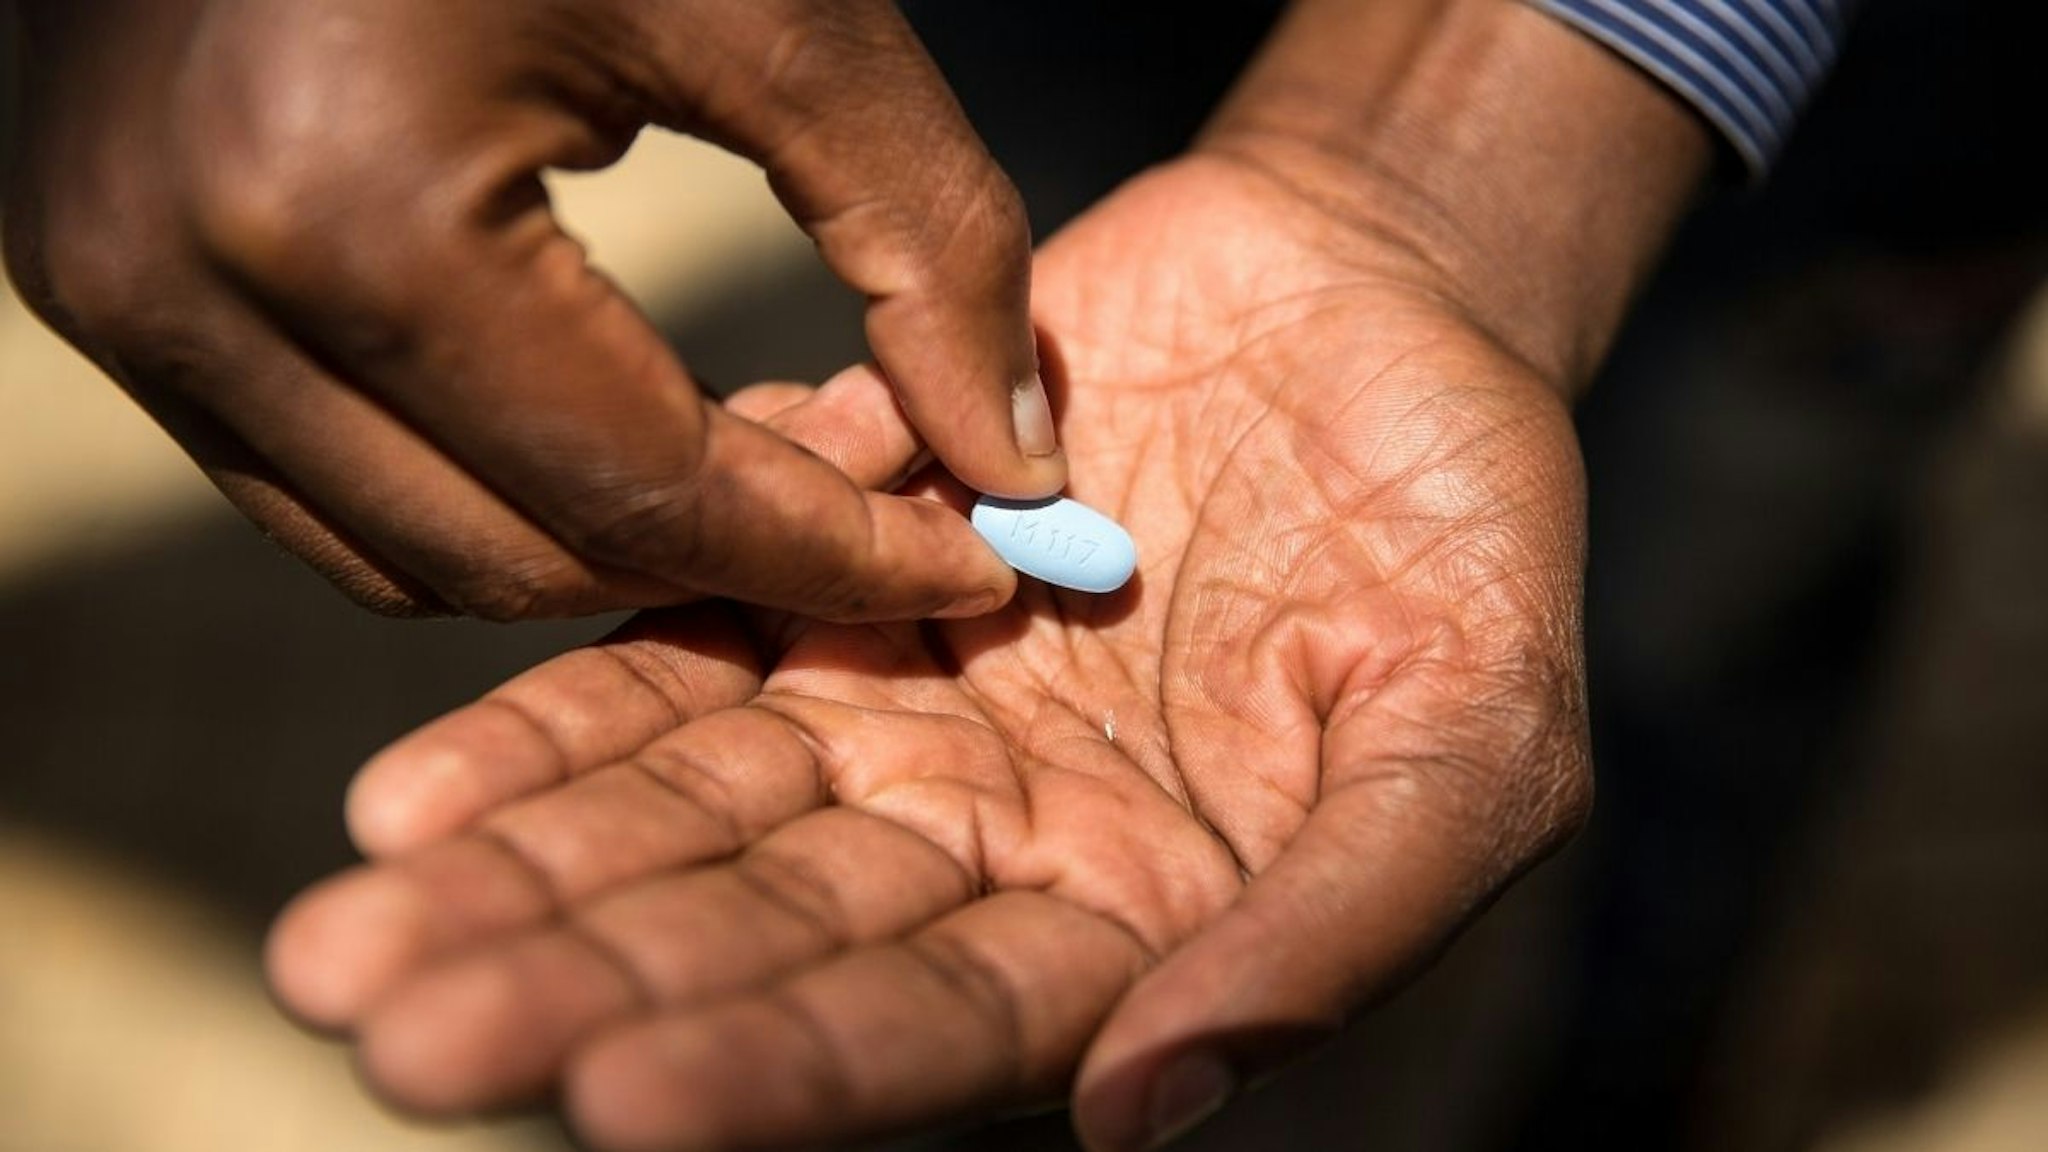 Thembelani Sibanda shows the Pre-Exposure Prophylaxis (PrEP), an HIV preventative drug during an interview on November 30, 2017 in Soweto, South Africa.